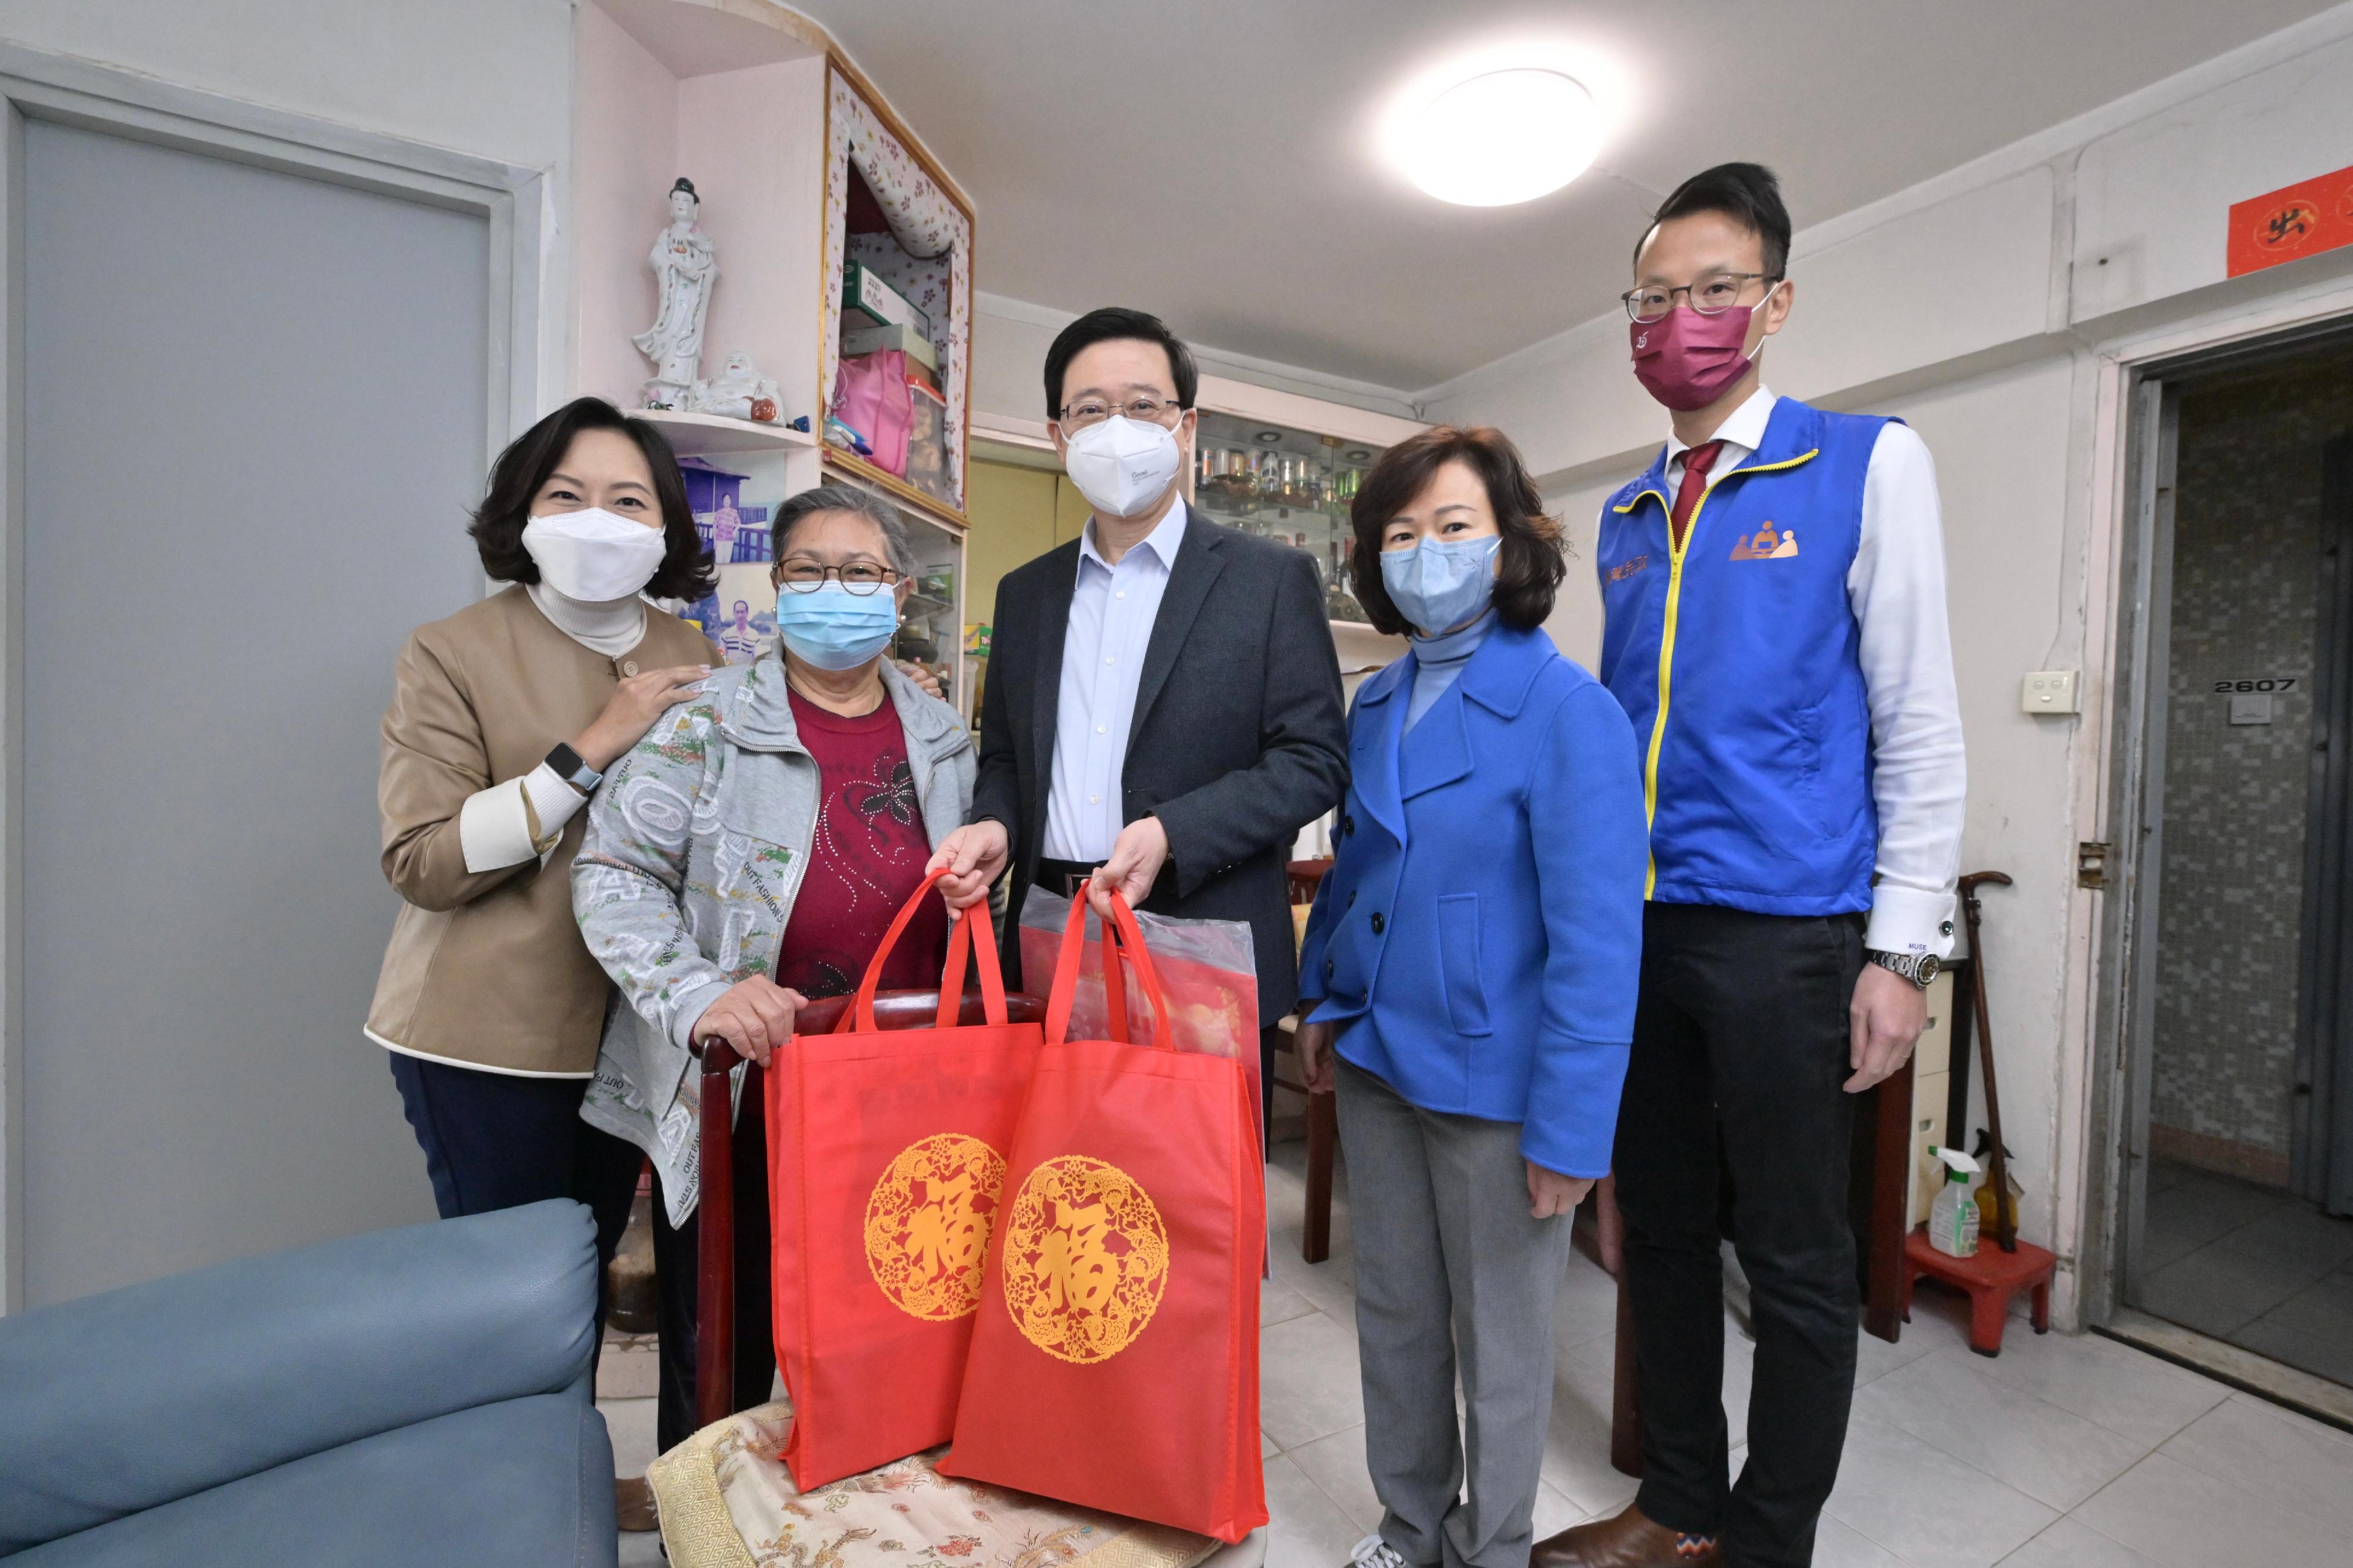 The Chief Executive, Mr John Lee, visited Cheung Hang Estate in Tsing Yi today (January 20). Photo shows Mr Lee (centre), accompanied by the Secretary for Home and Youth Affairs, Miss Alice Mak (first left) and the Director of Home Affairs, Mrs Alice Cheung (second right), visiting a single elderly person to learn about her needs and daily life, and give a gift pack to her.